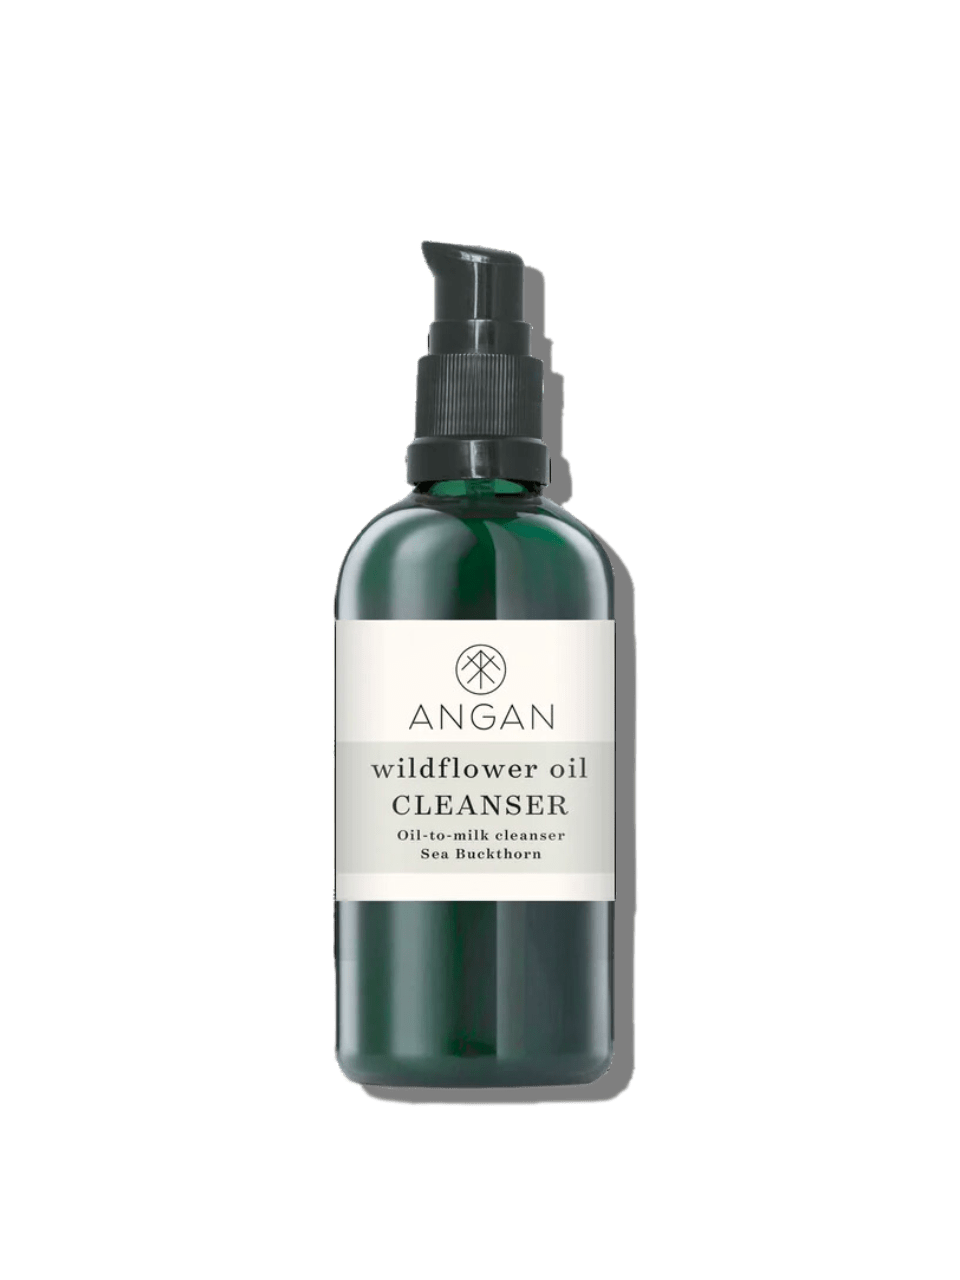 Wildflower Oil Cleanser SKINCARE ANGAN 